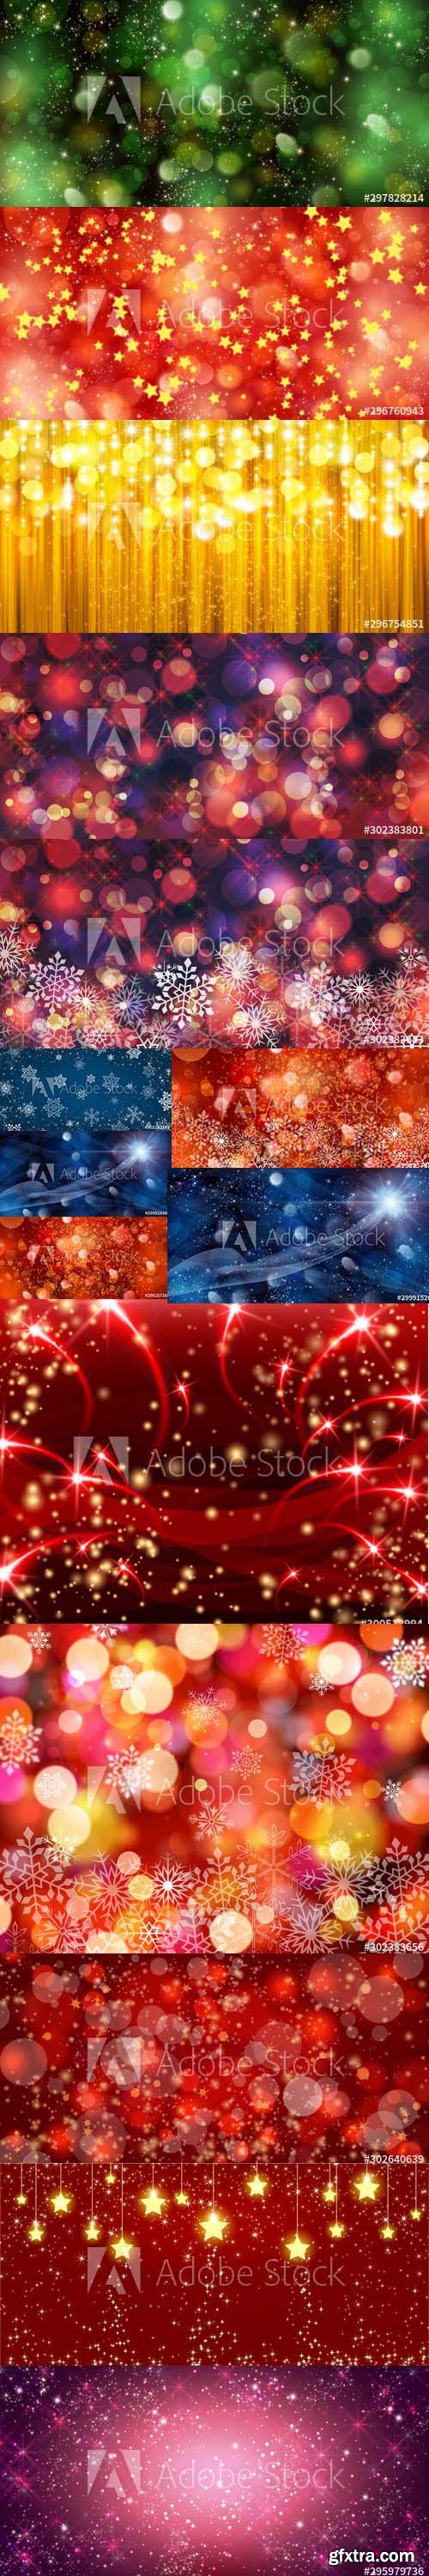 Magic Christmas Backgrounds Pack